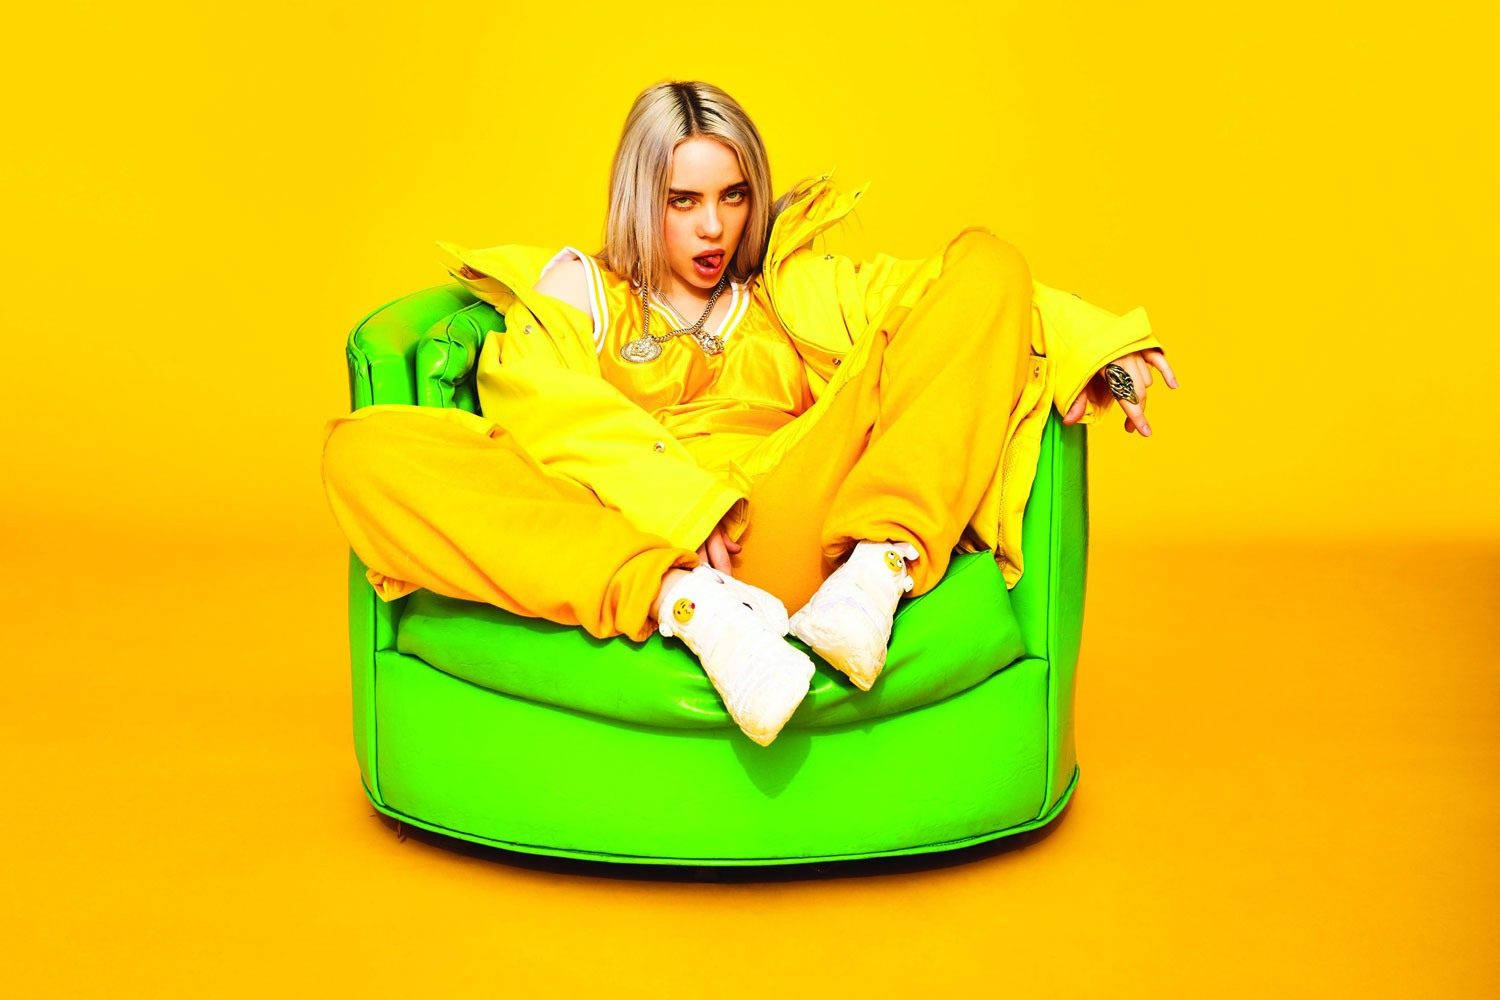 Is This A Hint Billie Eilish Is Releasing Her New Album In March? Background